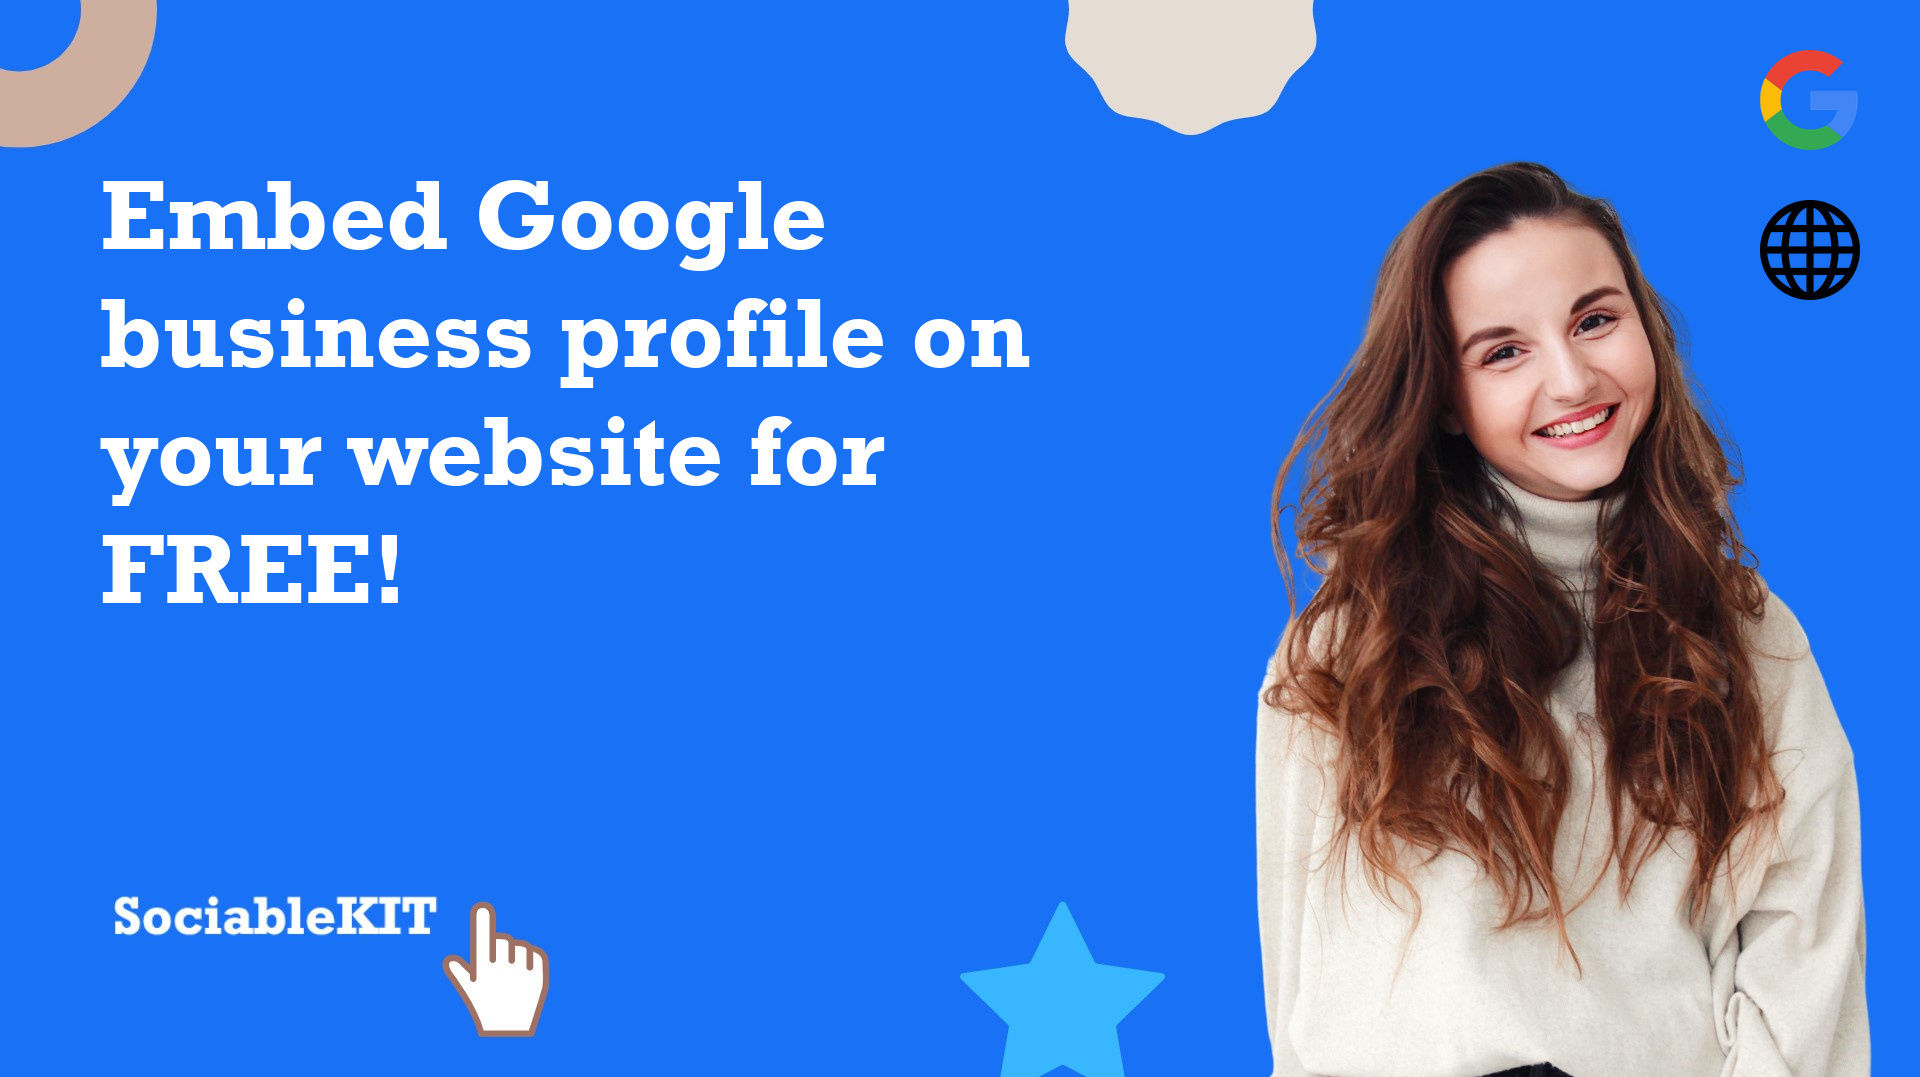 How to embed Google business profile on your website for FREE?